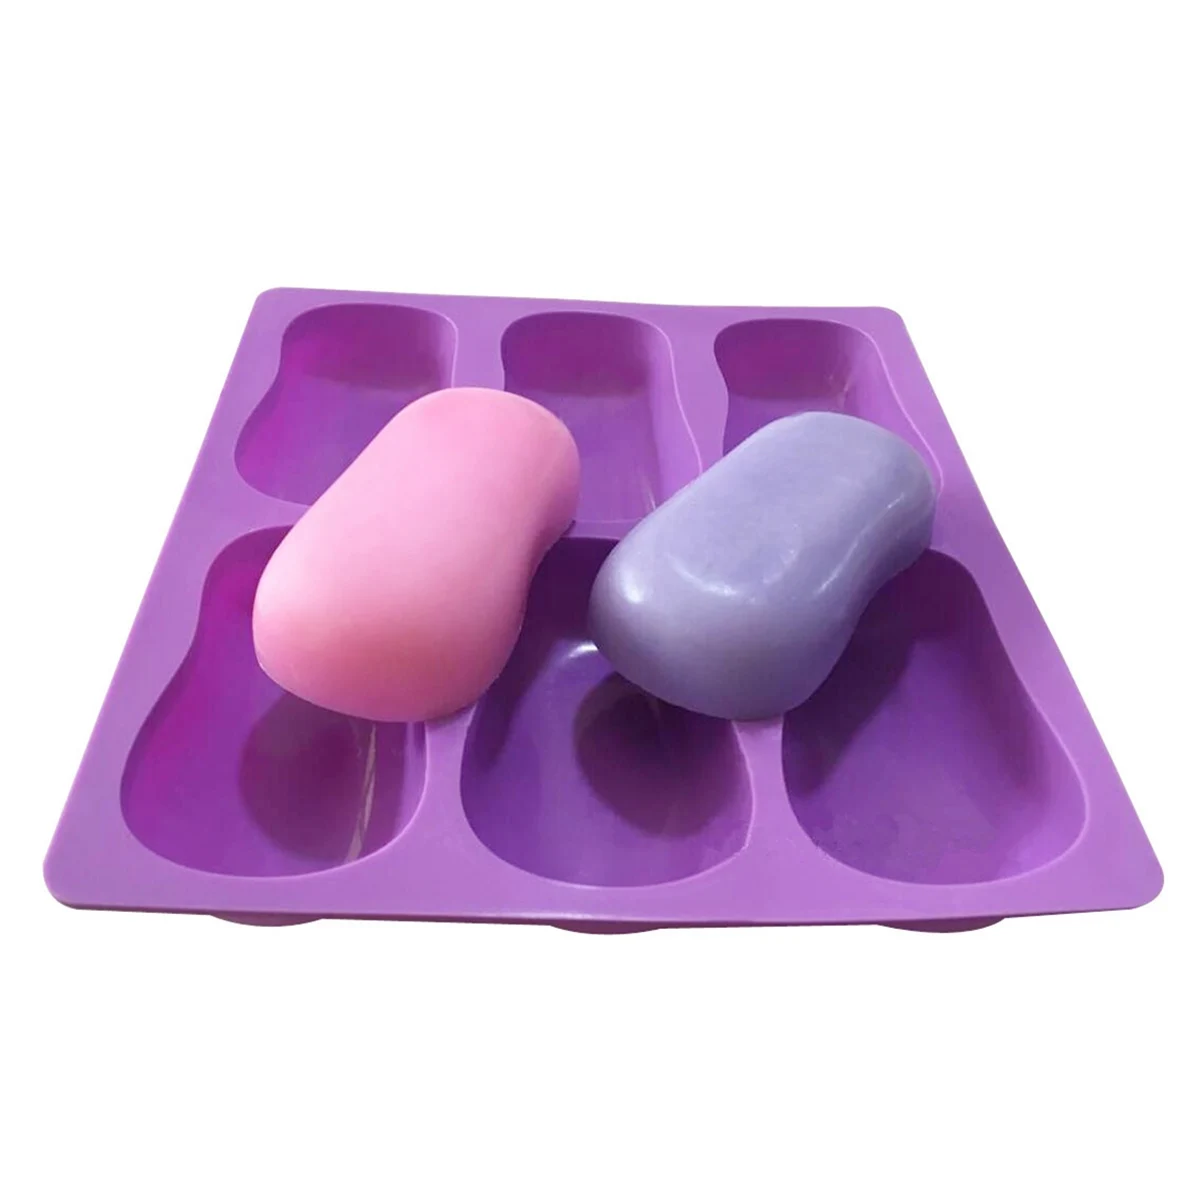 

Homemade Soap Mold 6 Ovals Shape Silicone Mold DIY Jelly Pudding Chocolate Mould Bakeware Kitchen Cake Decorating Tools Gadgets